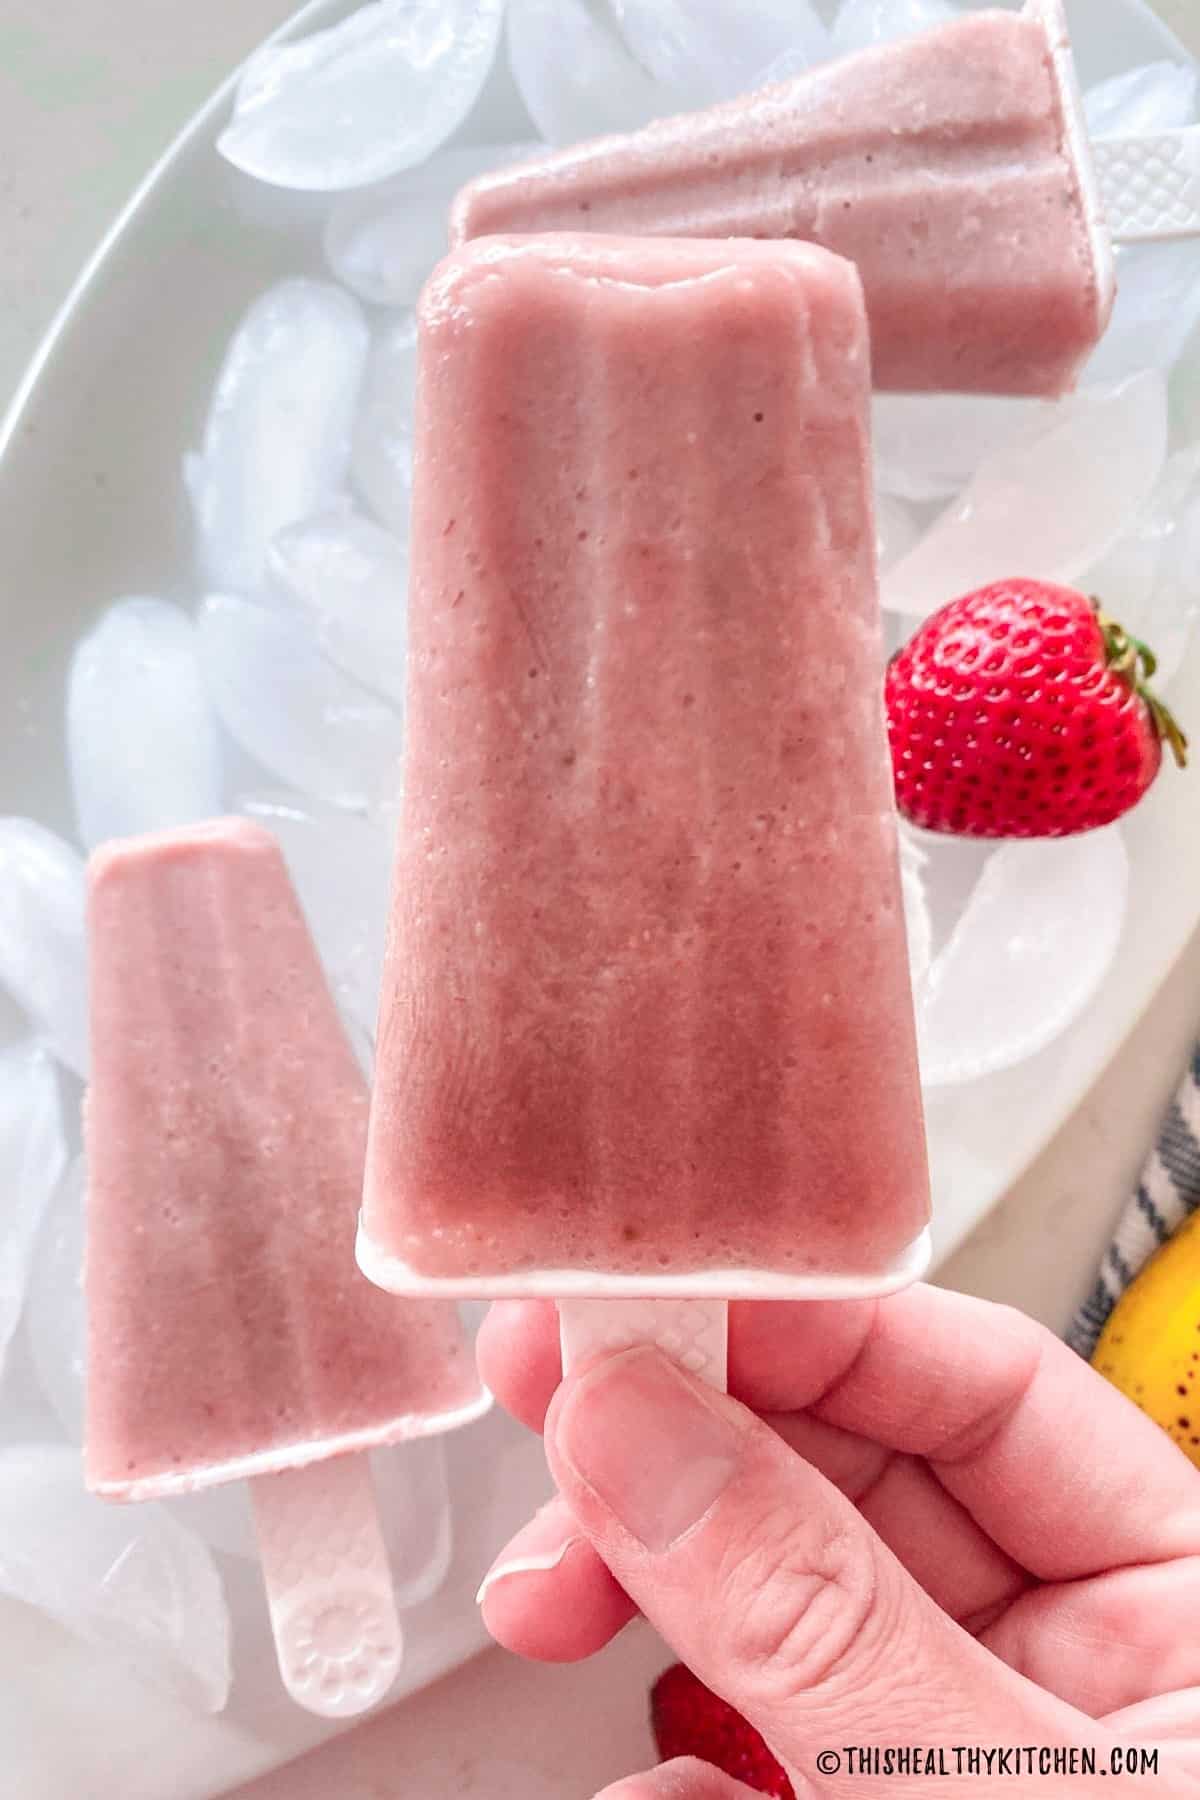 Hand holding up pink popsicle with more on tray below.